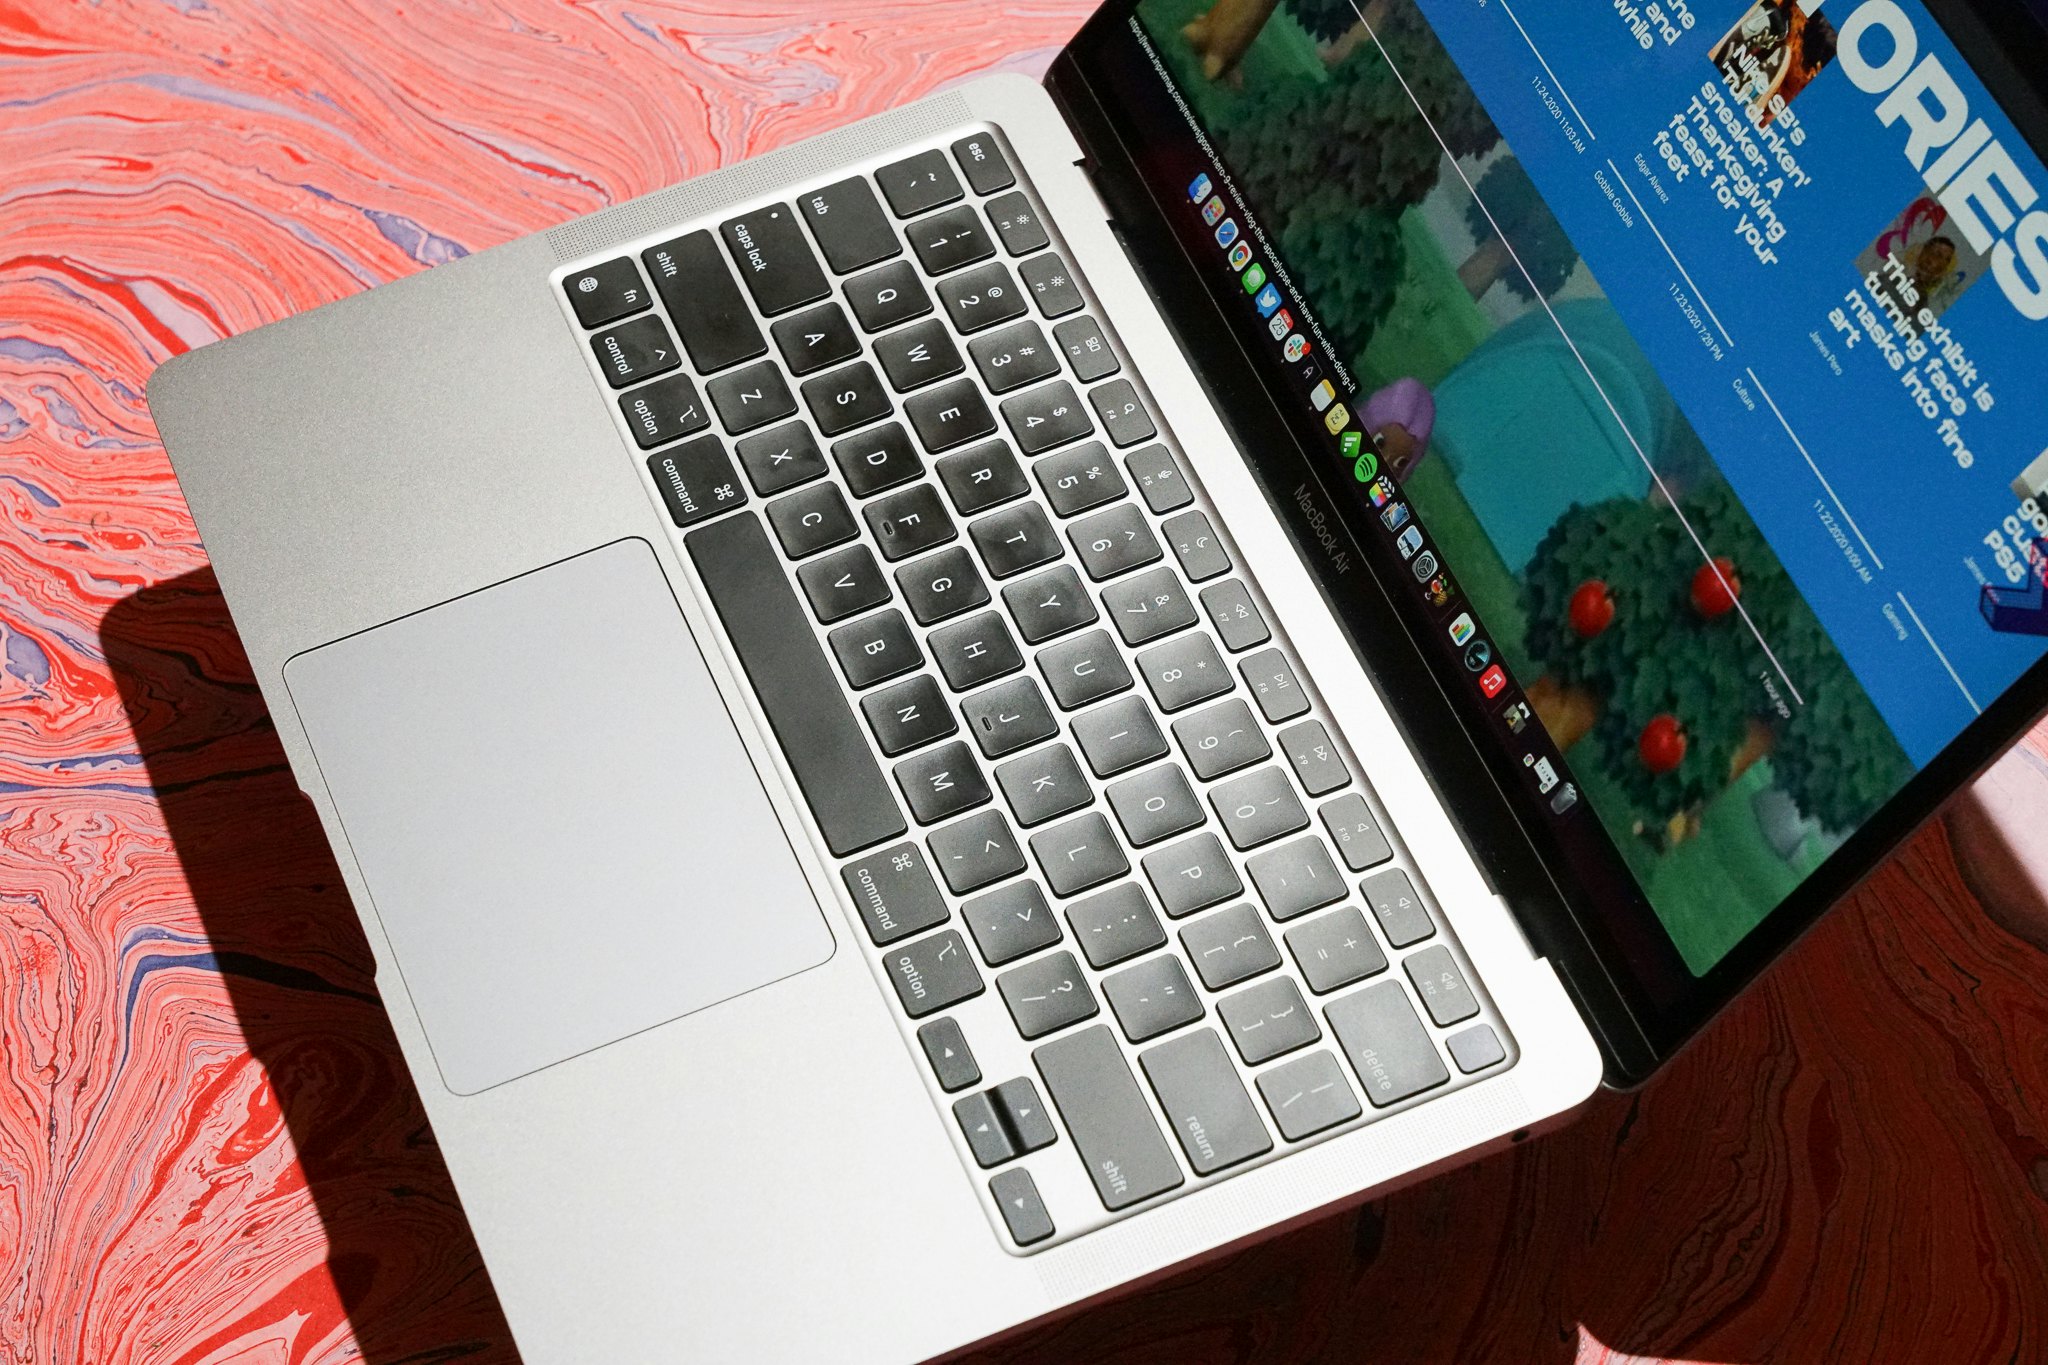 how to get windows on macbook air